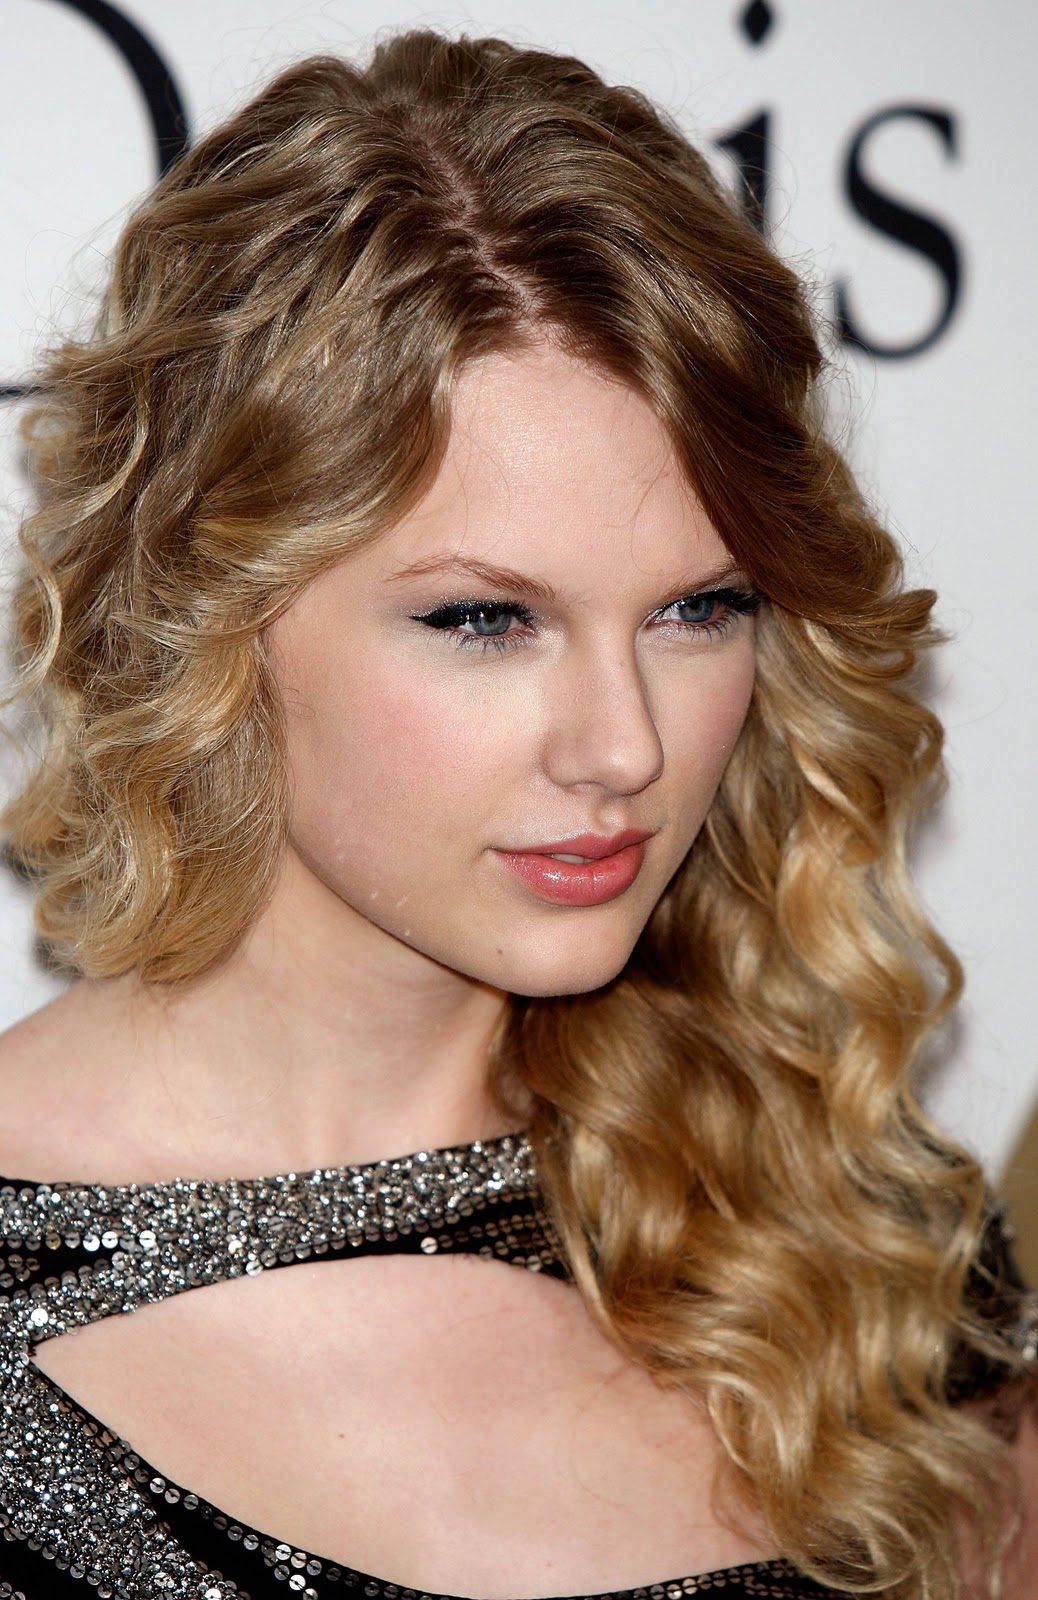 The teach Zone: Taylor Swift Hairstyle "Love Story" Updo 